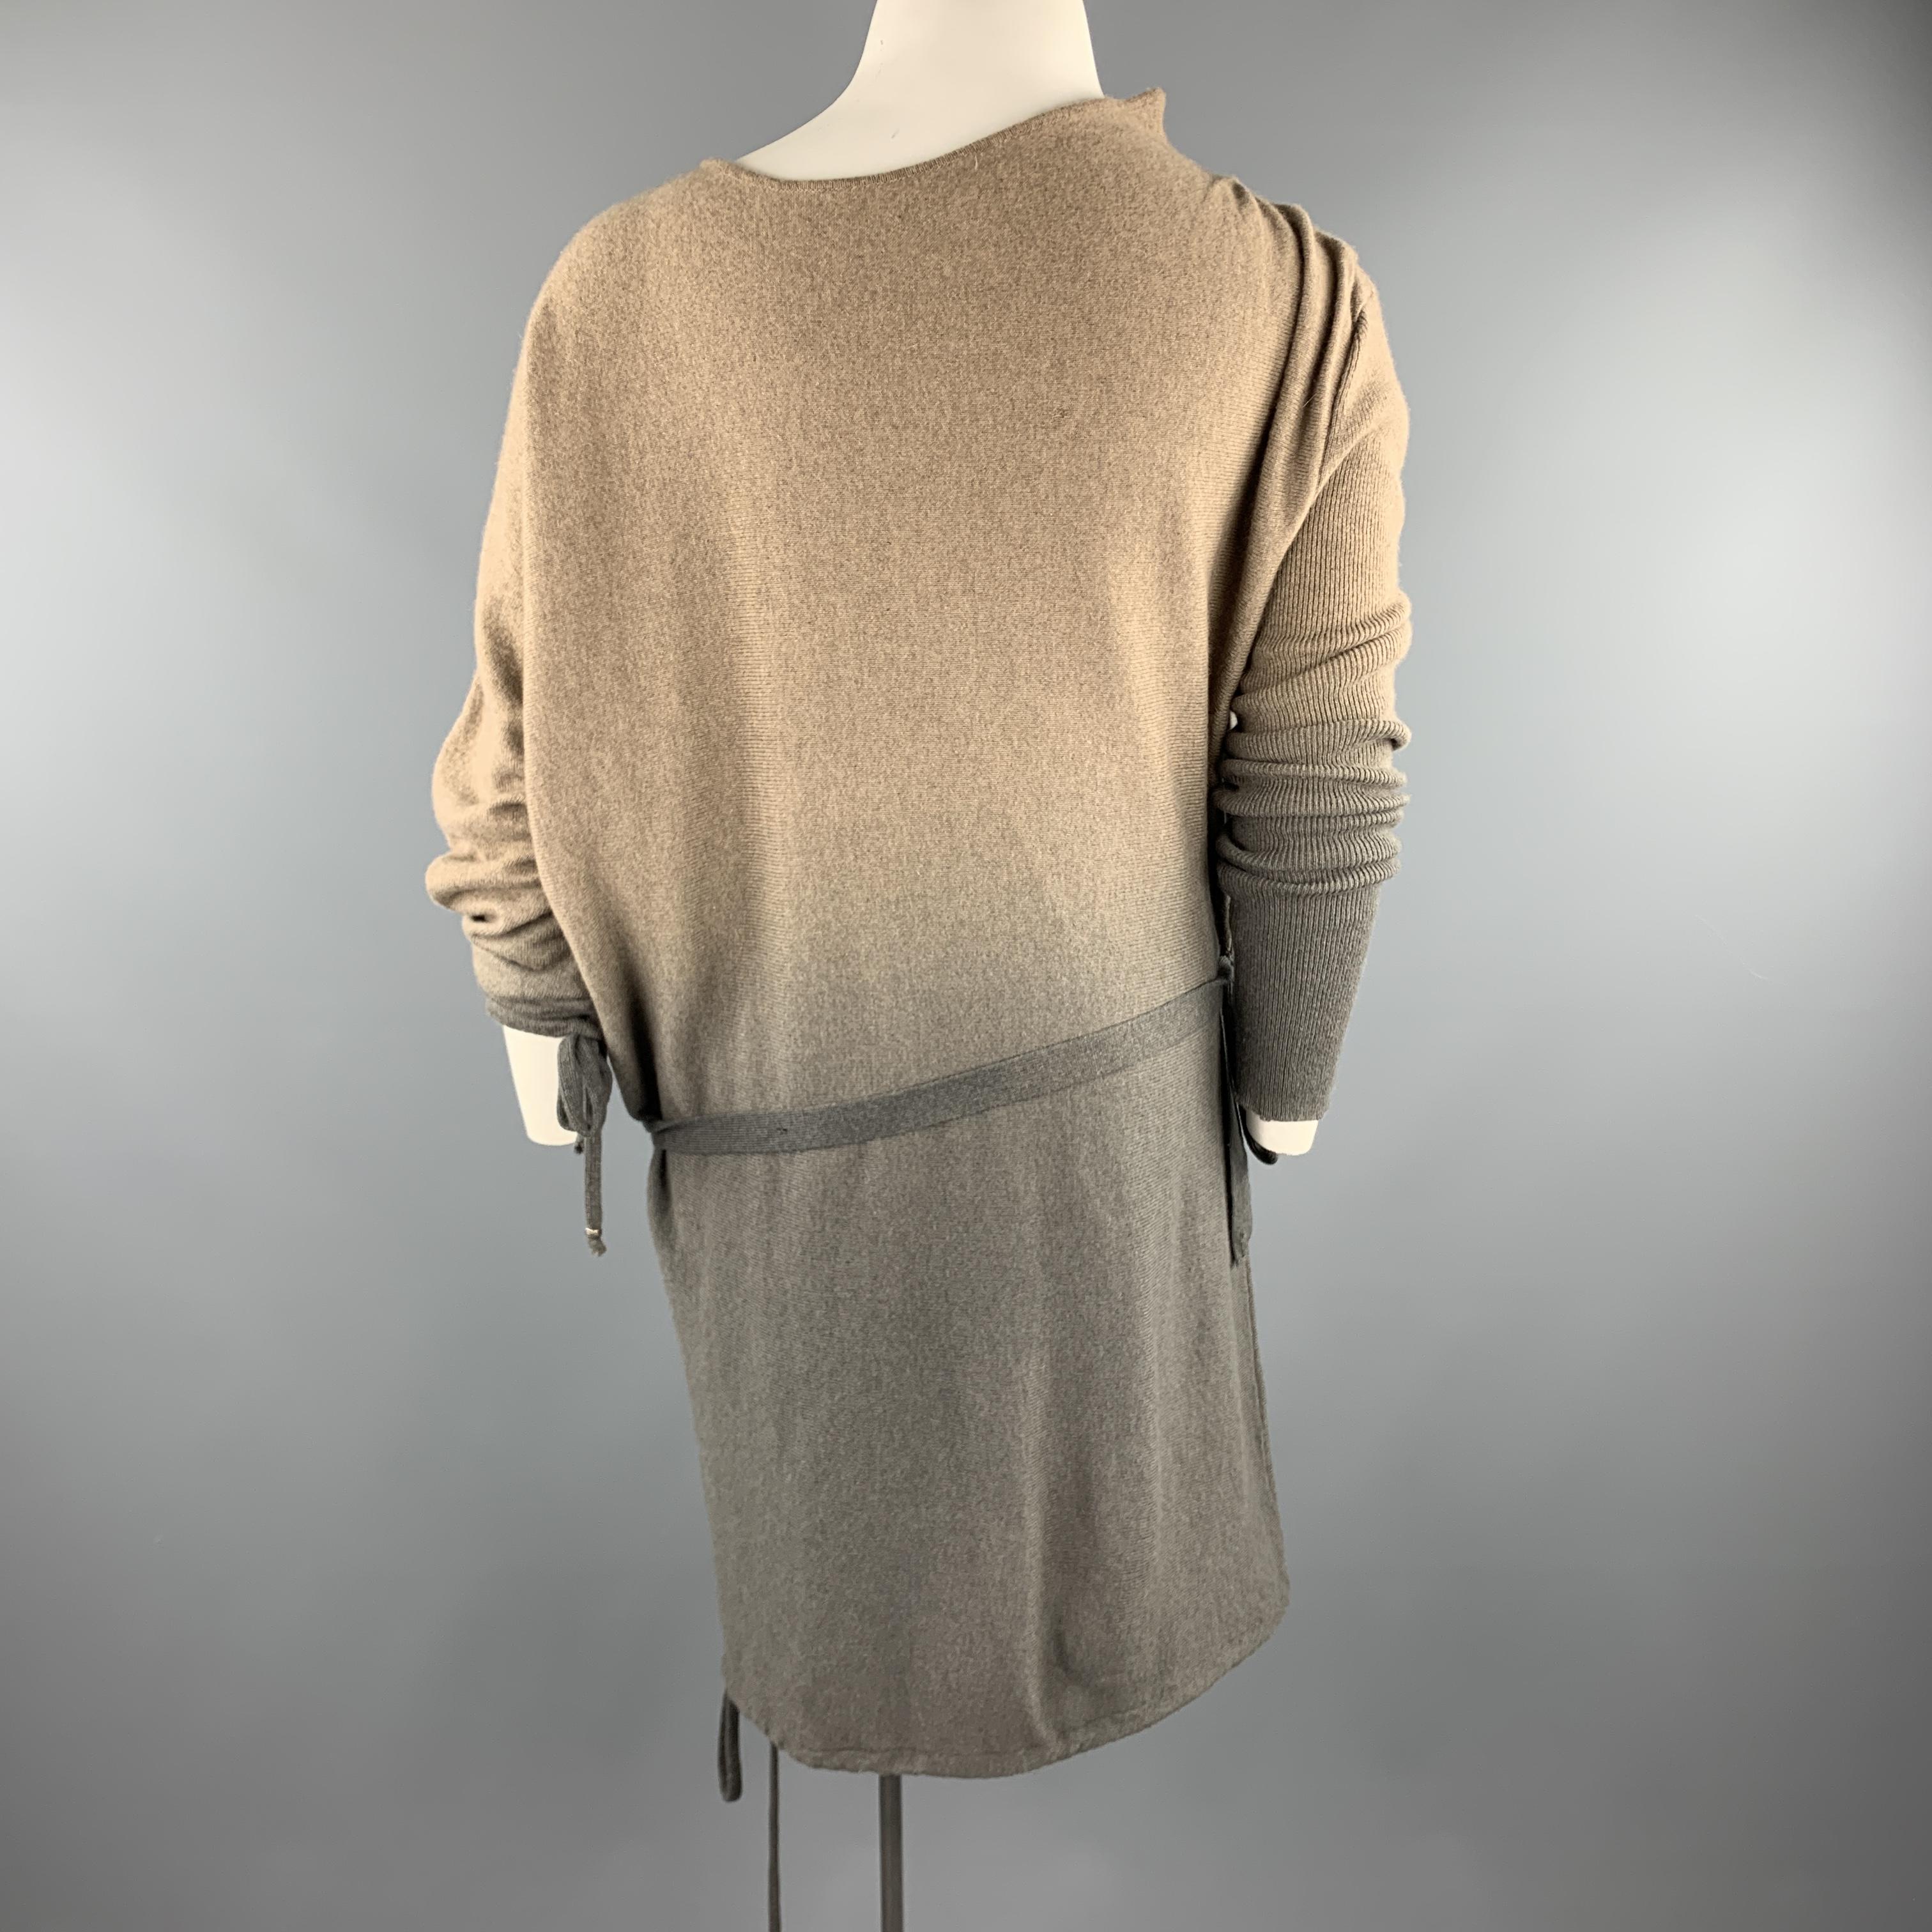 Women's HENRY BEGUELIN Size M Taupe & Grey Ombre Asymmetrical Cashmere Dress